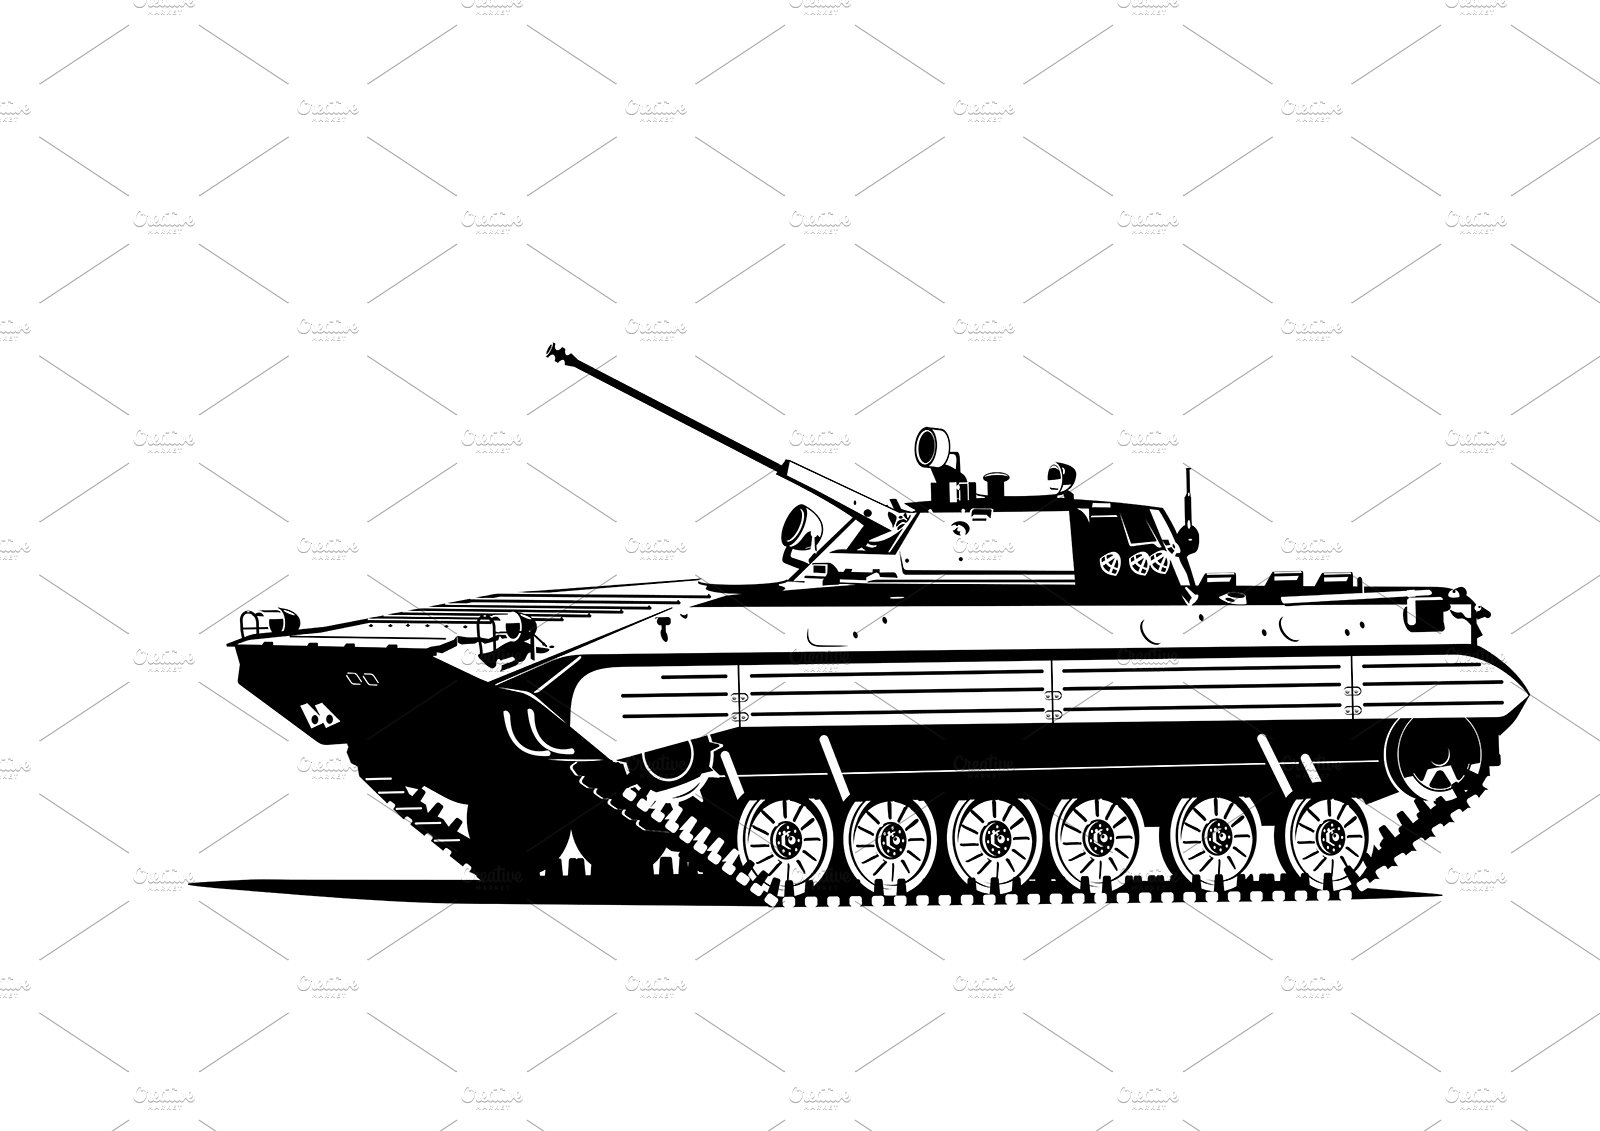 IFV (Infantry fighting vehicle) preview image.